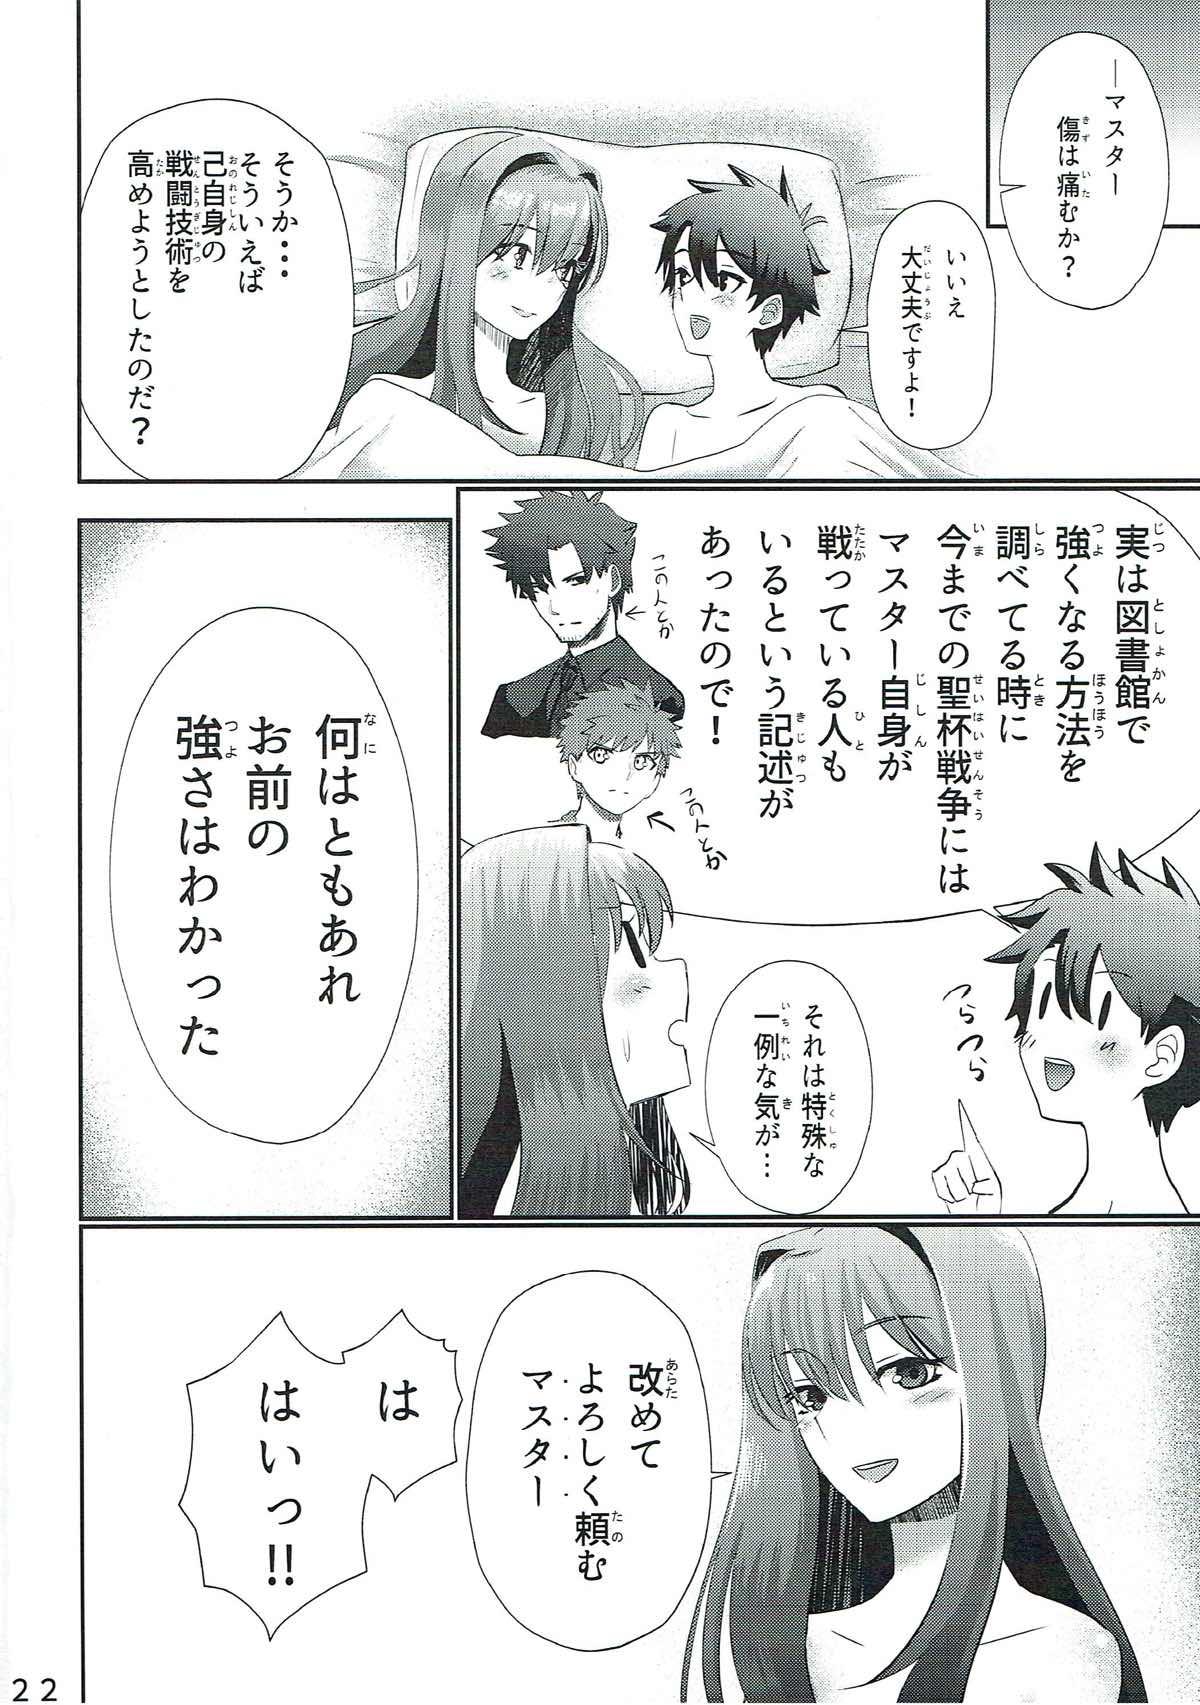 Scathach-san to Issho 20